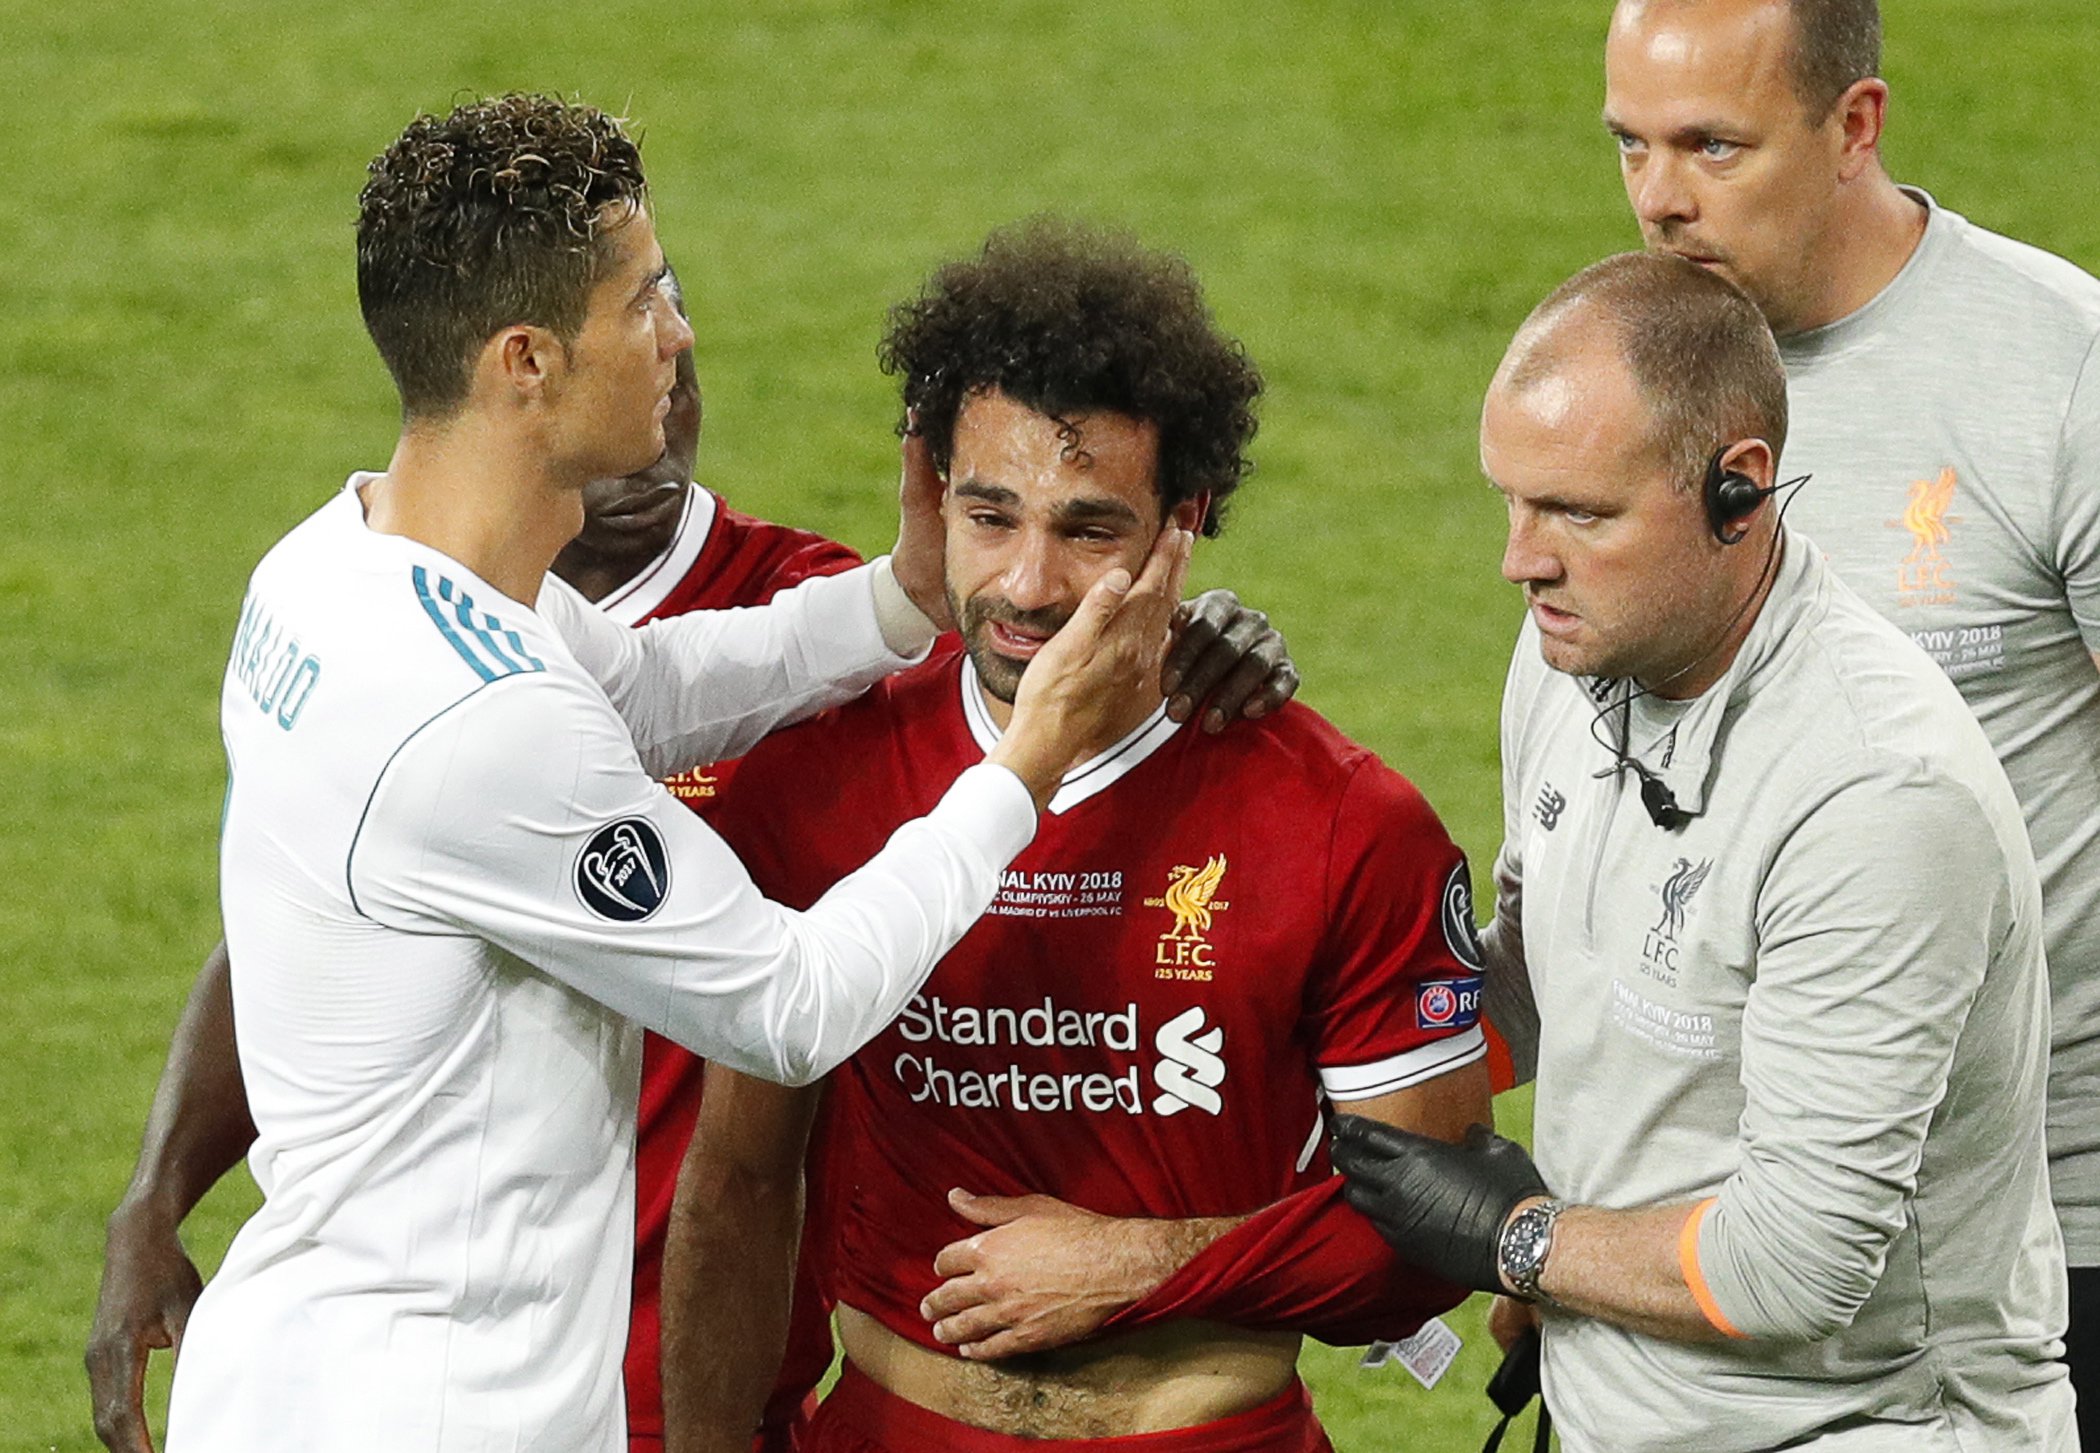 Mohamed Salah to return from injury in time for Egypt's second World Cup game